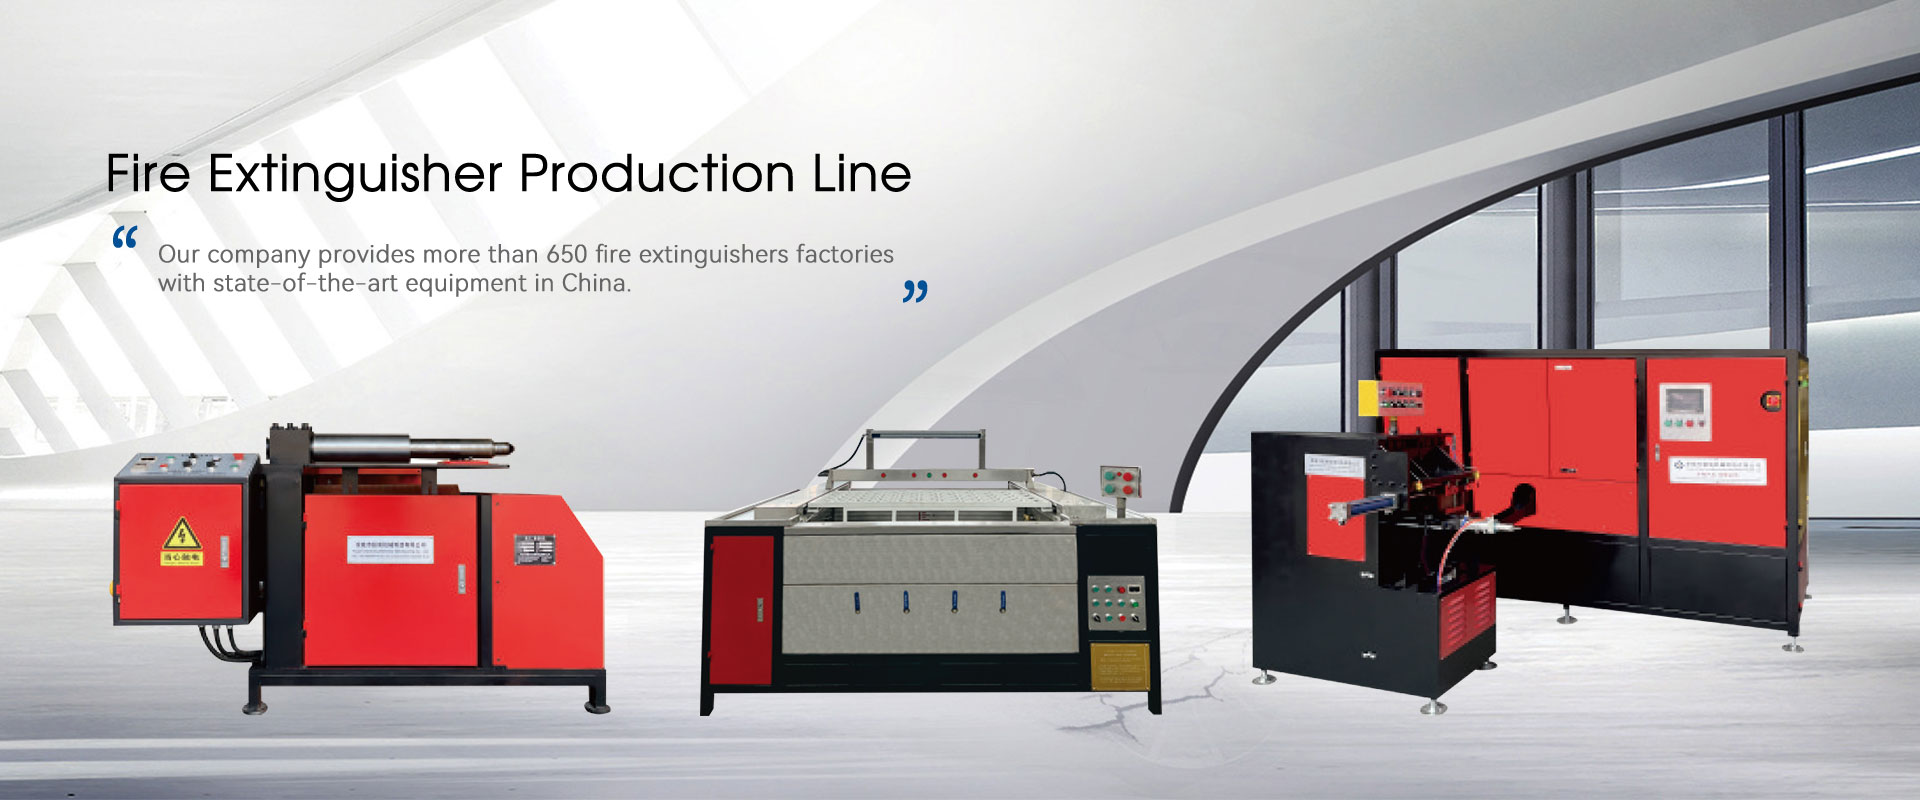 China Fire Extinguisher Production Line 